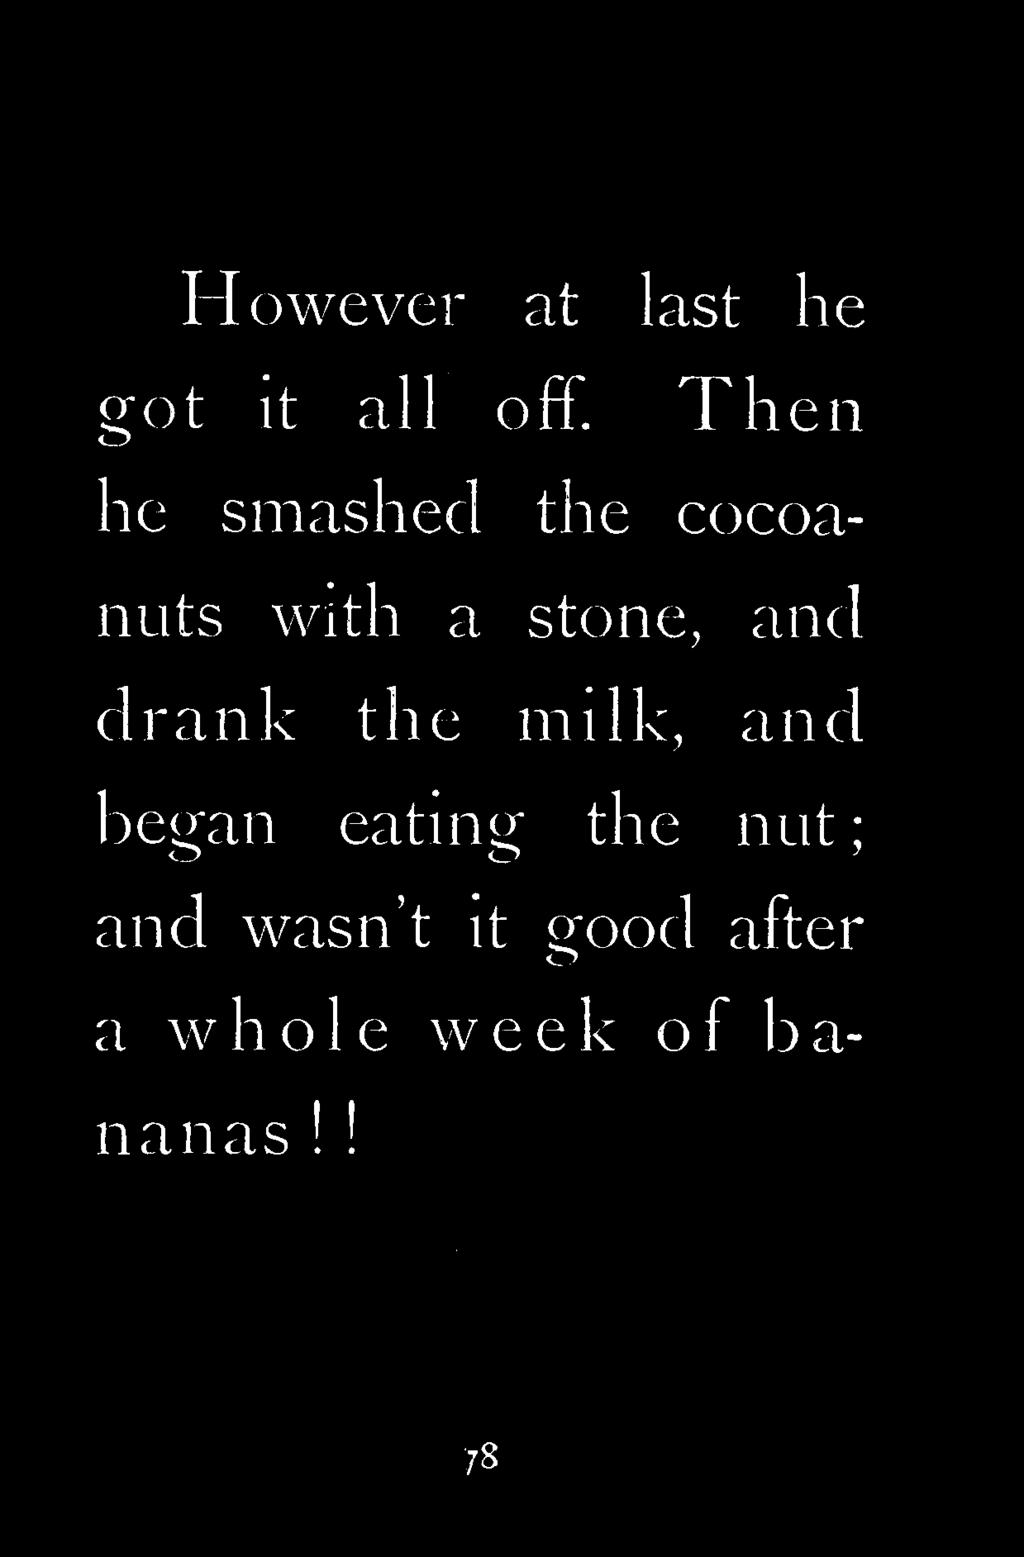 stone, and drank the milk, and began eating